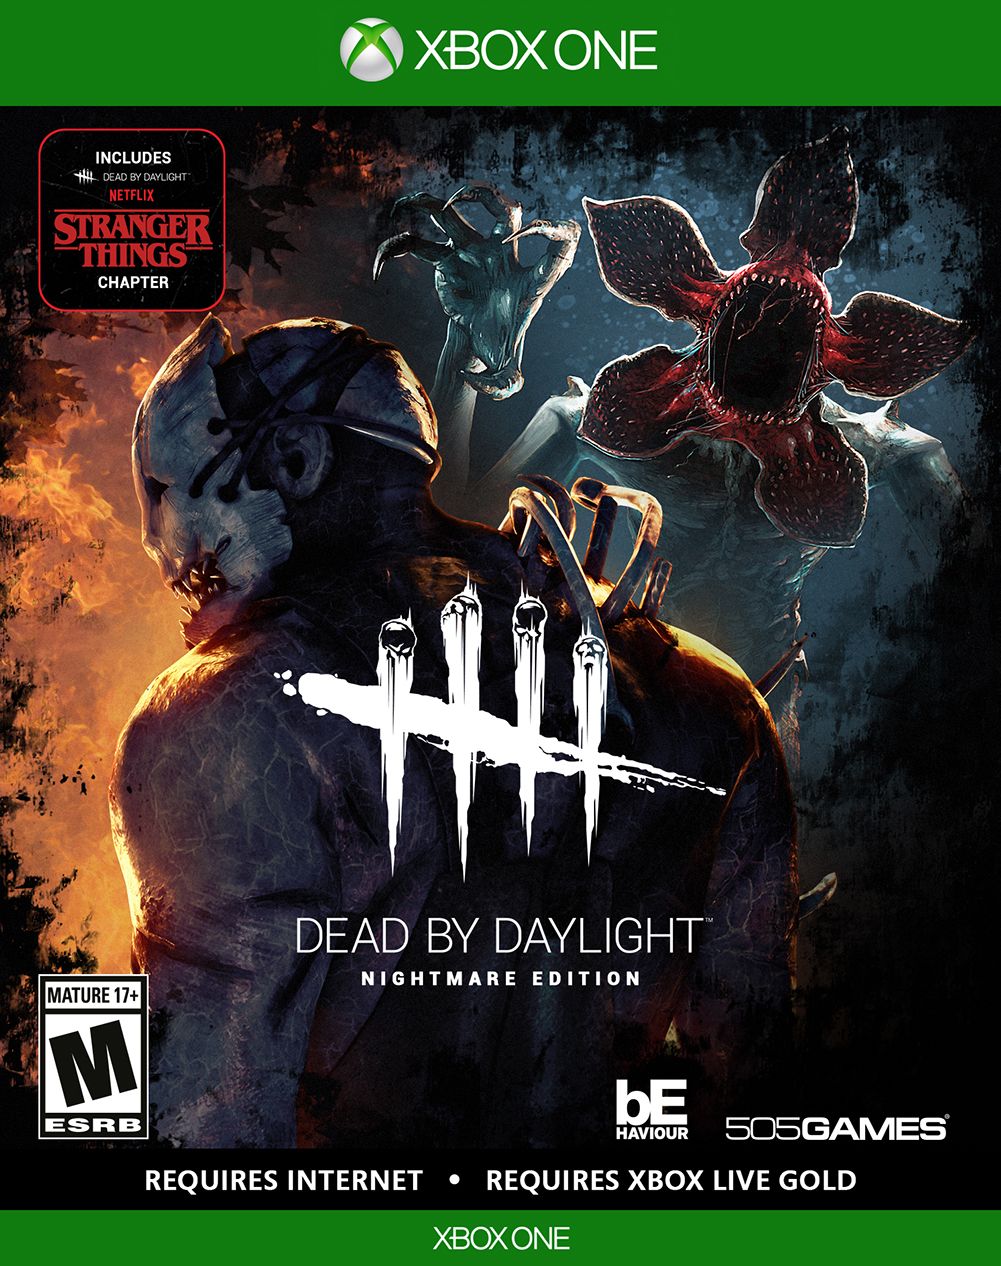 Dead by Daylight [Nightmare Edition] Video Game